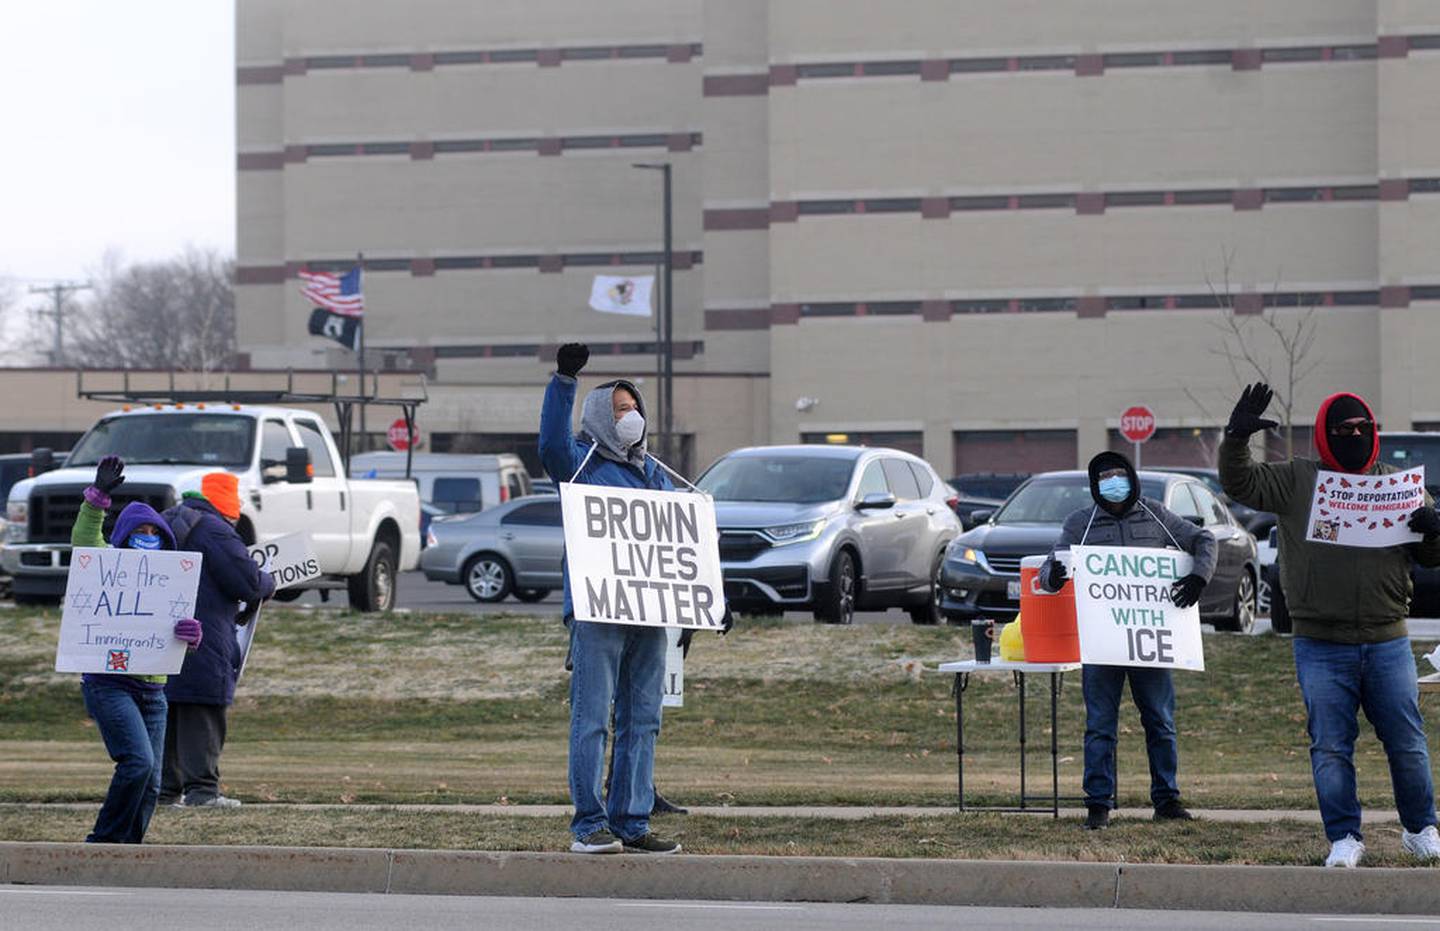 Protesters hold up signs the morning of Thursday, Dec. 3, 2020, during a rally aimed at persuading the McHenry County Board to cancel its contract with the U.S. Immigration Customs and Enforcement to detain immigrants in the McHenry County Jail. About 25 to 30 people protested outside the facility at 2200 N. Seminary Ave. in Woodstock.